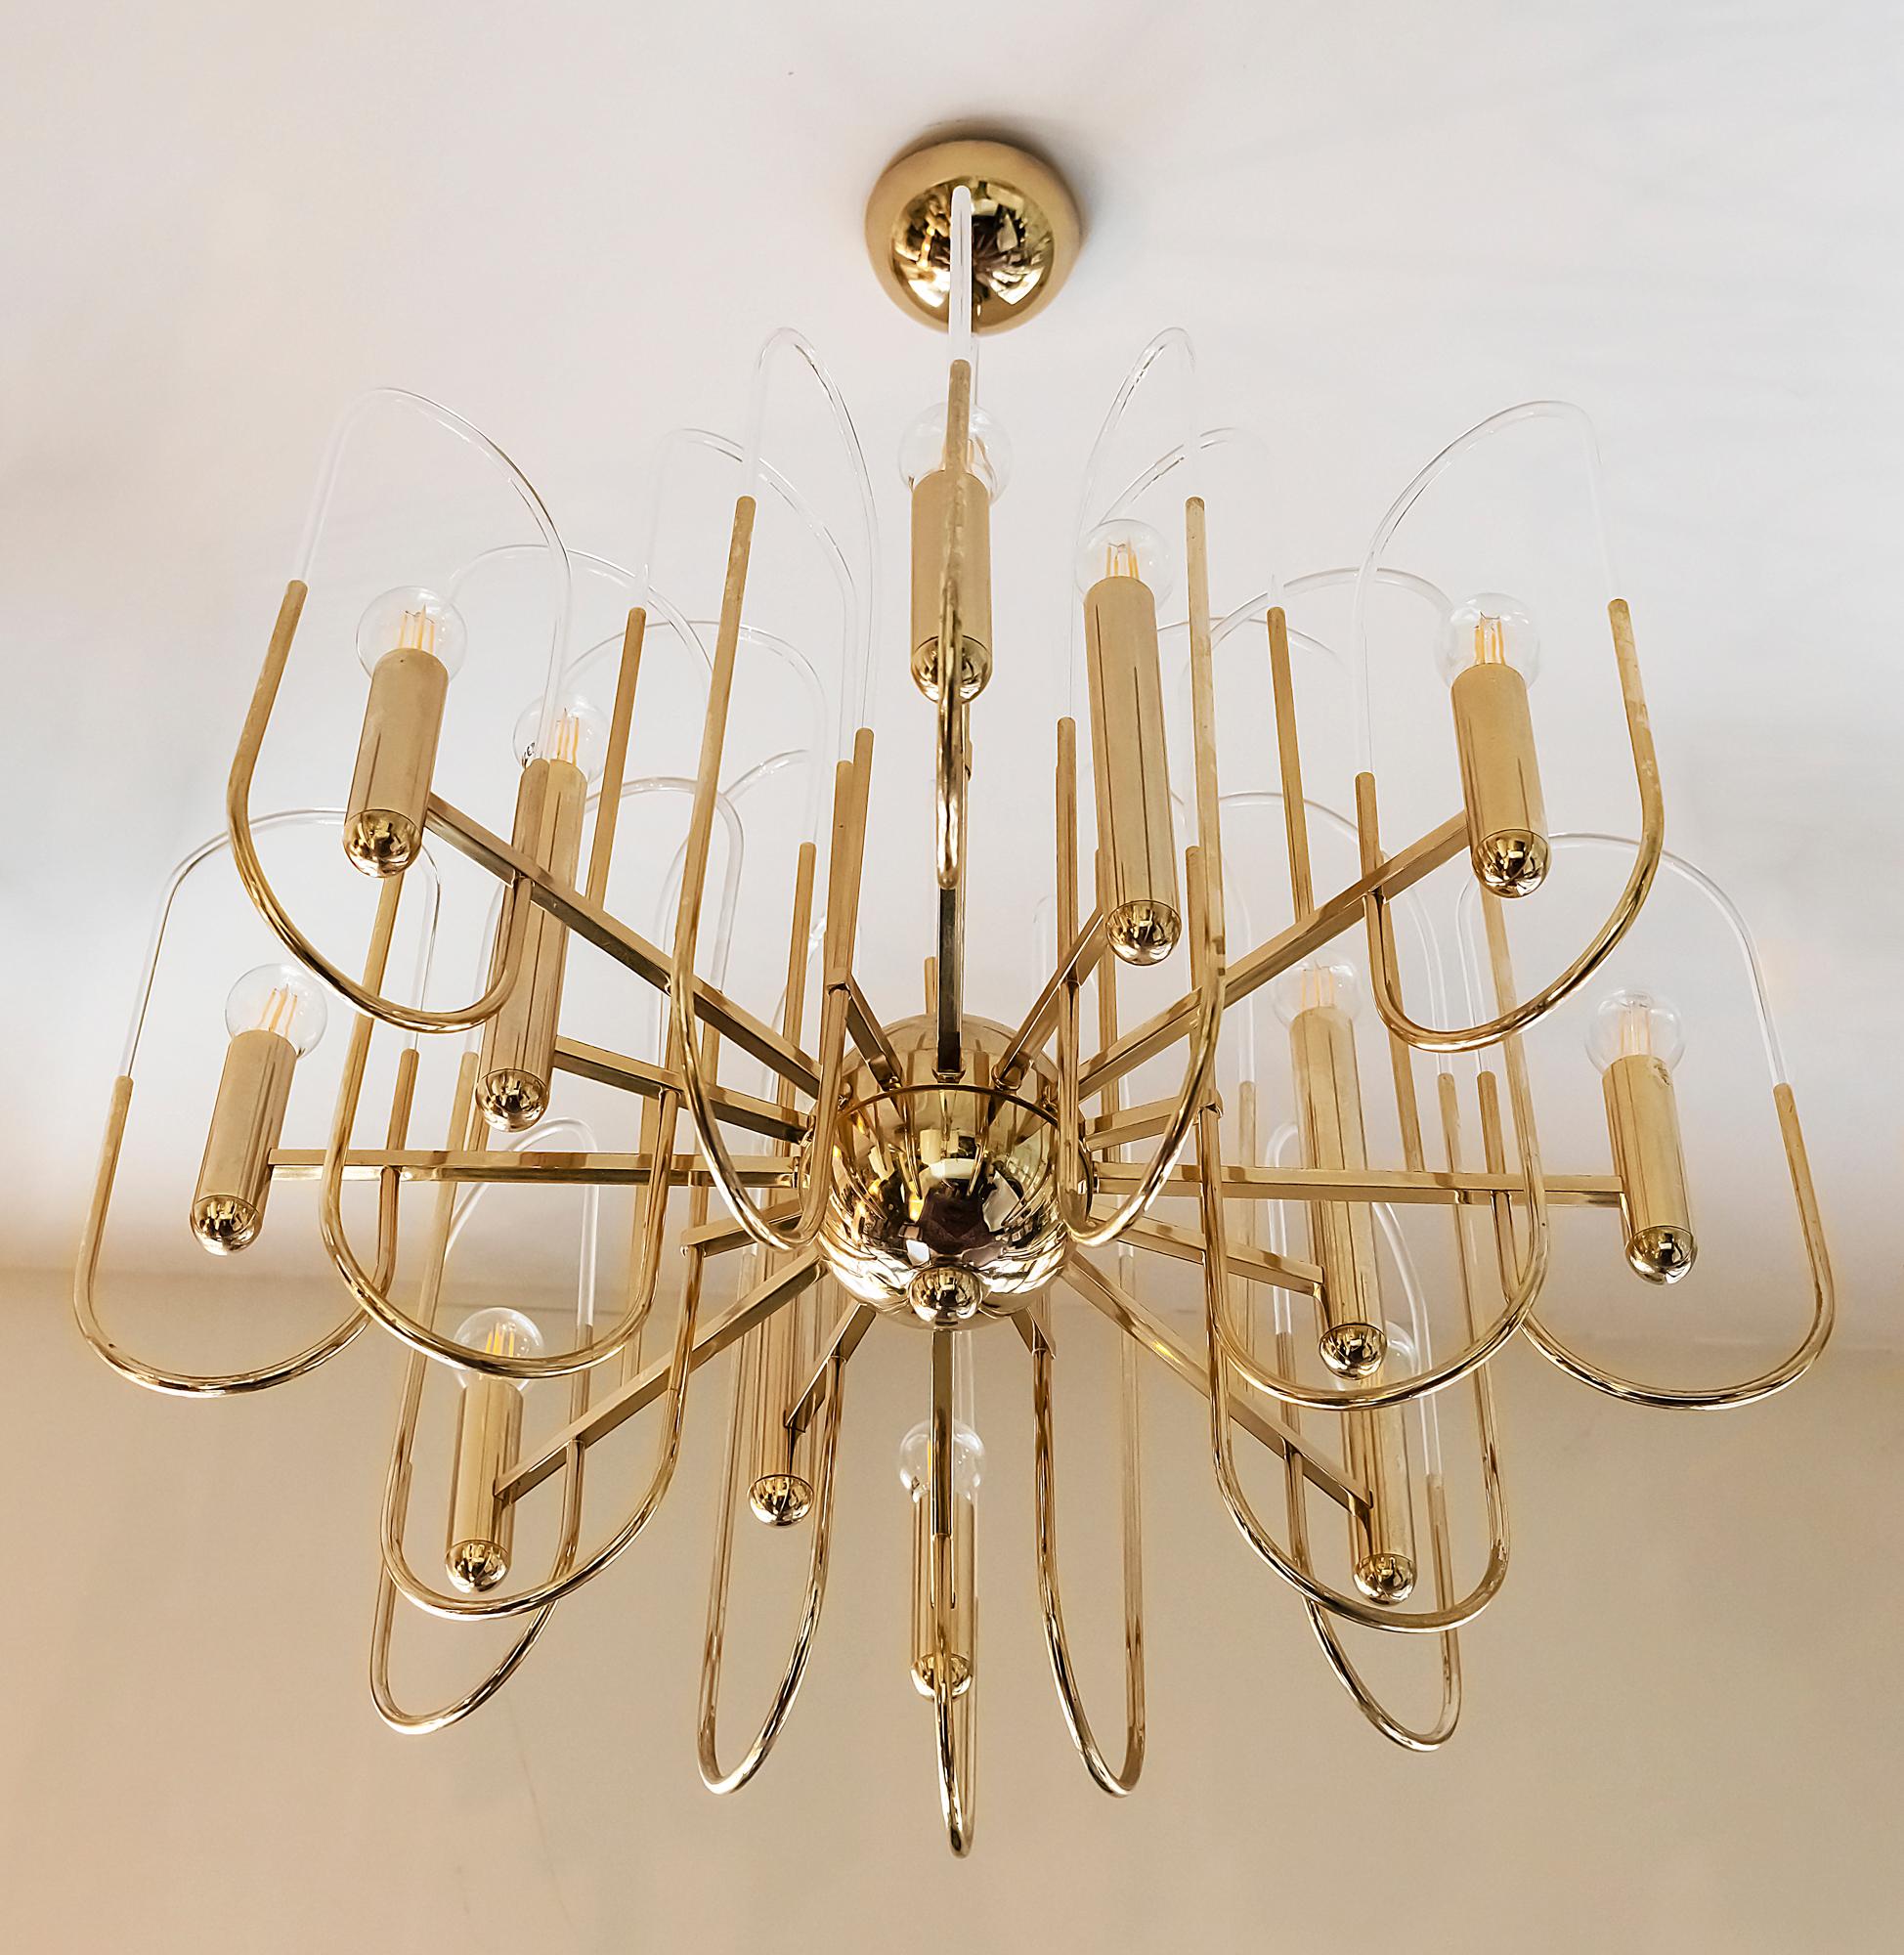 Italian mid-century polished gilt brass chandelier with clear glass elements in the holders.
This chandelier includes 12 pieces. E14 bulbs.
Its is in a very good original vintage condition.
  
   